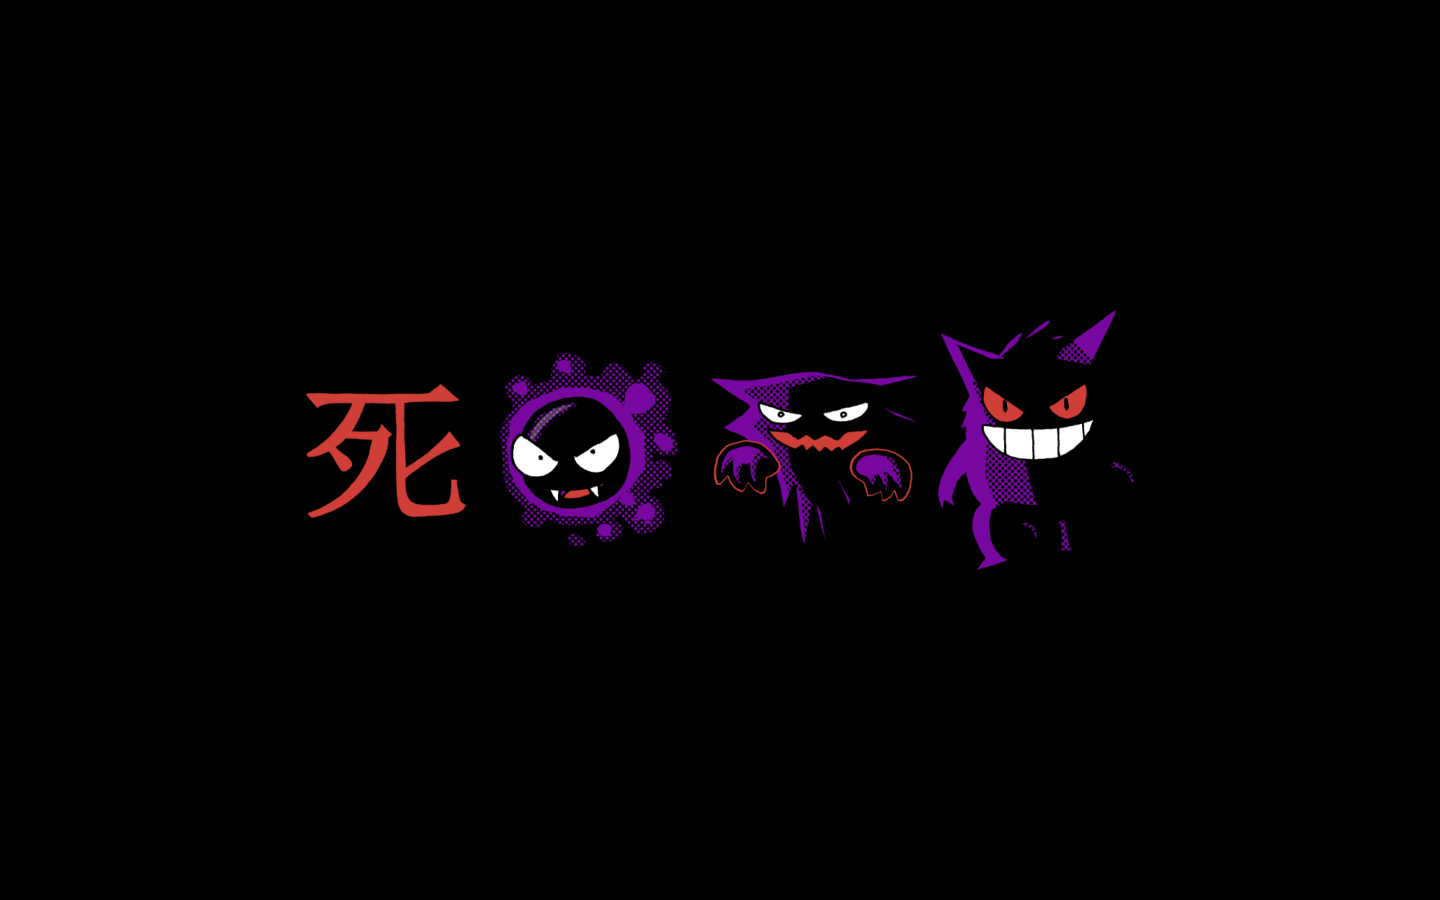 Wallpapers Gengar Hd To See This Picture In Full Size Just Right ...